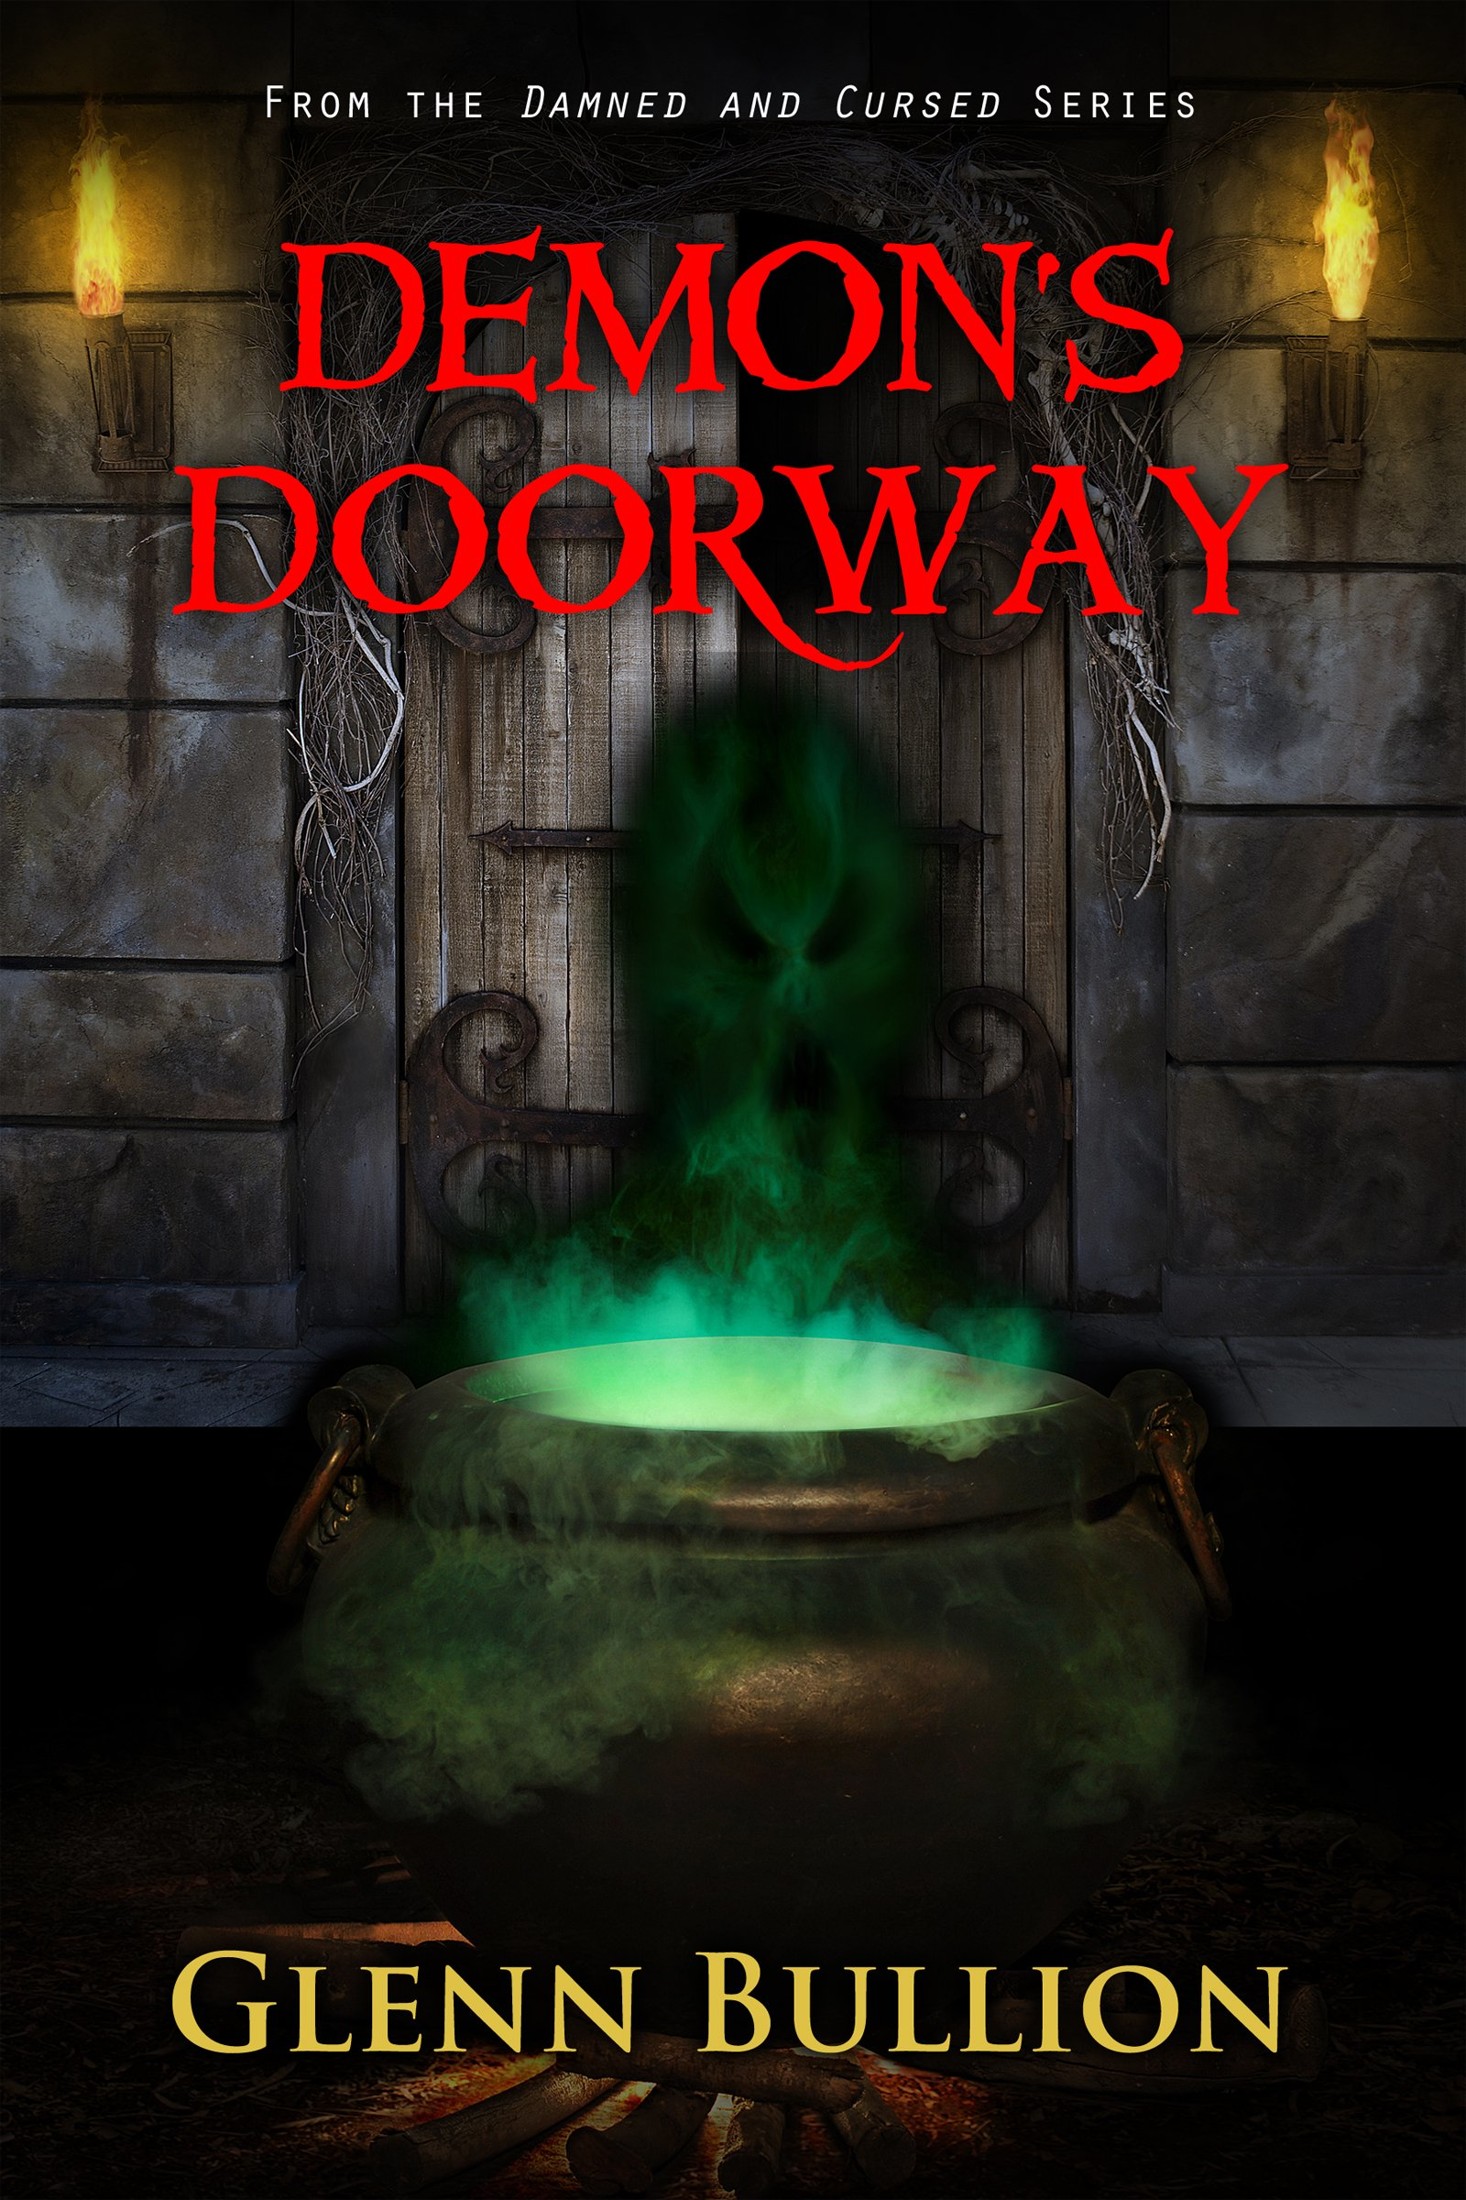 Demon's Doorway (Damned and Cursed Book 4)